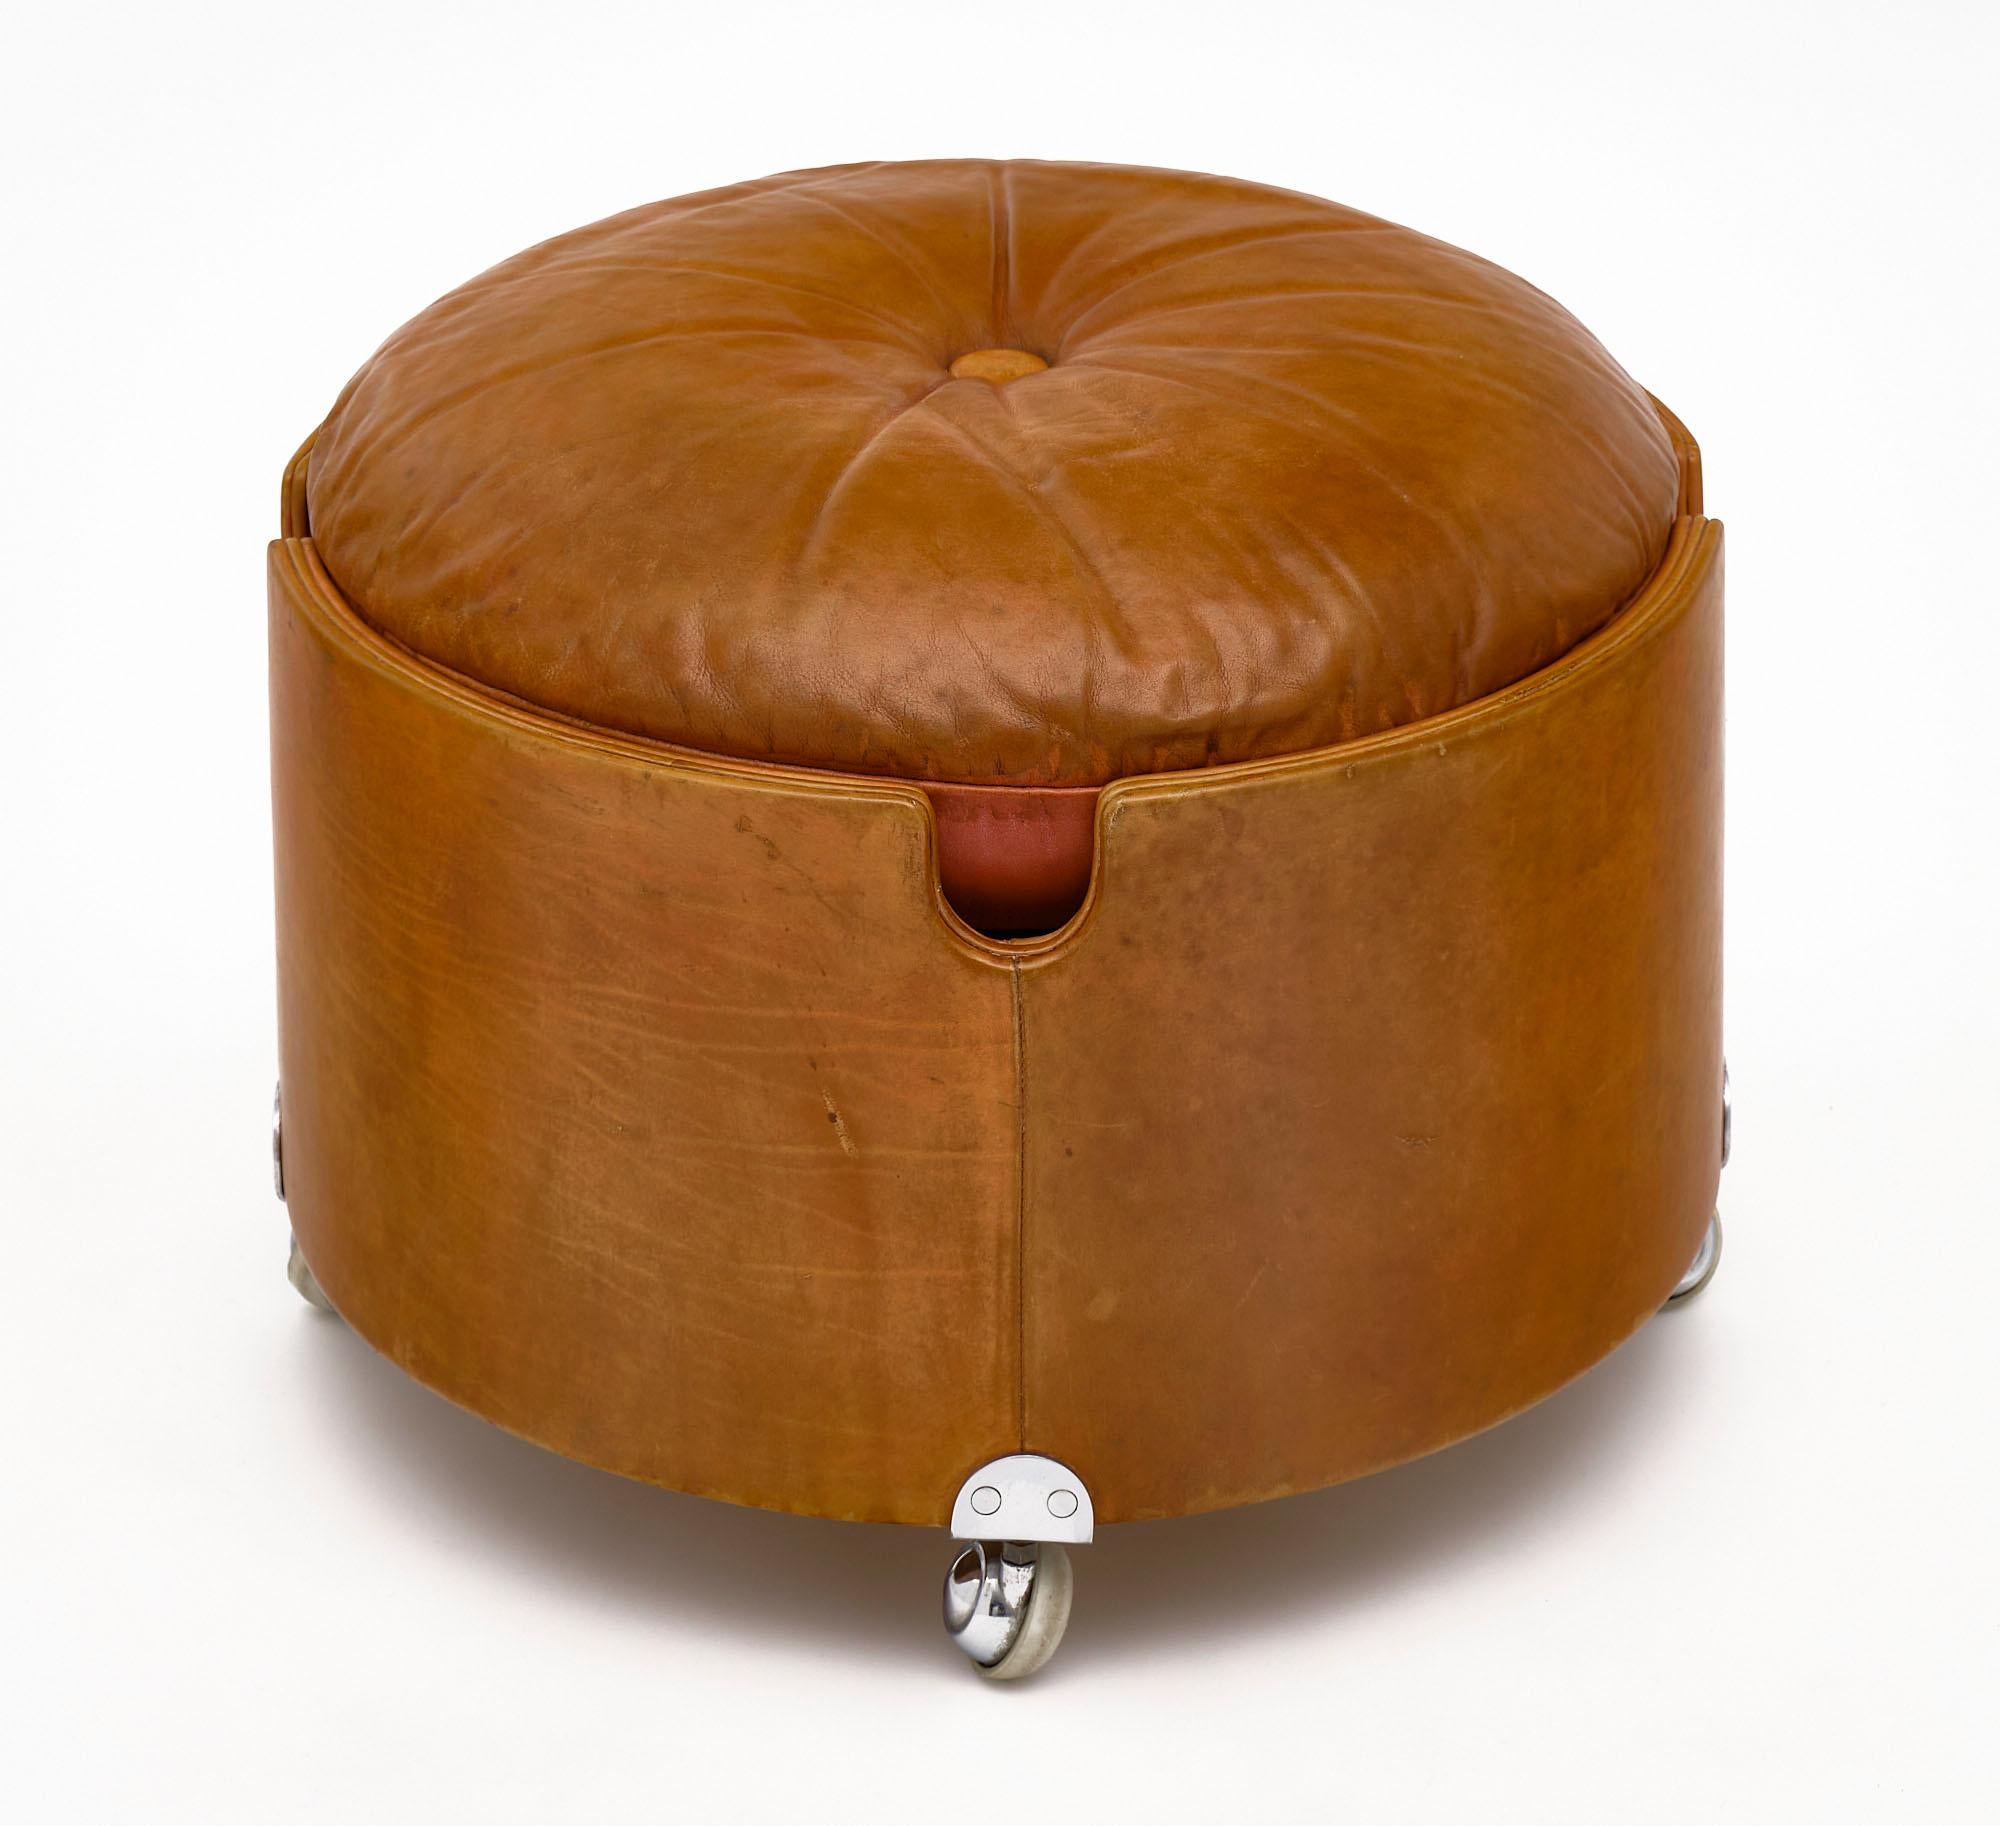 Leather ottoman by iconic Italian designer Poltrona Frau. This comfortable and versatile ottoman features chromed steel casters and the original leather upholstery in very good condition.